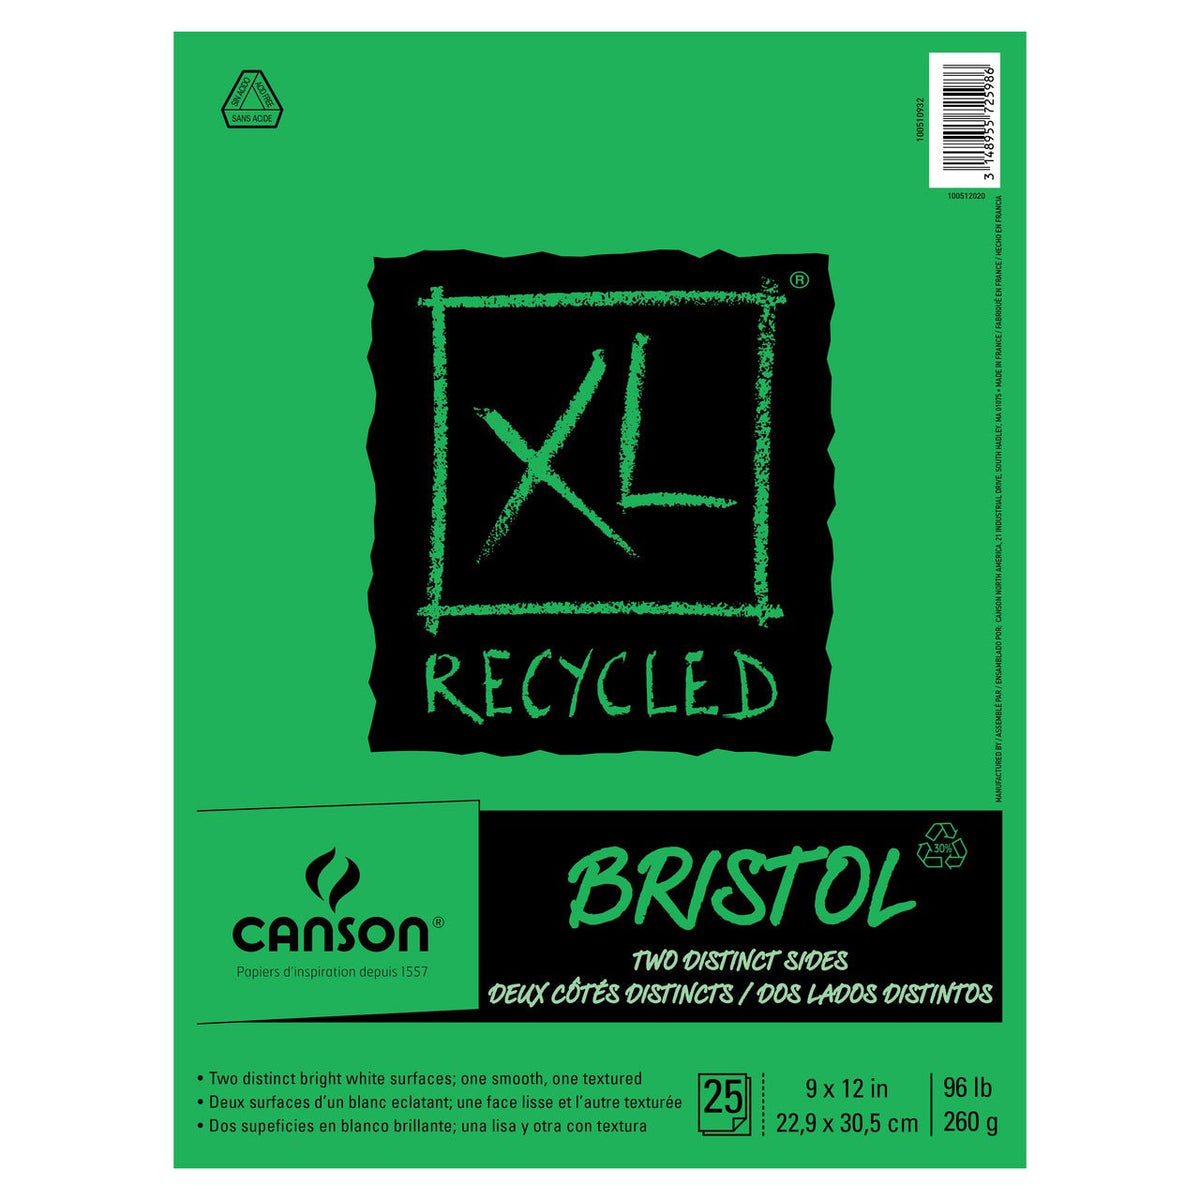 2- Canson XL Series Watercolor Textured Paper Pad 9 x 12 - 30